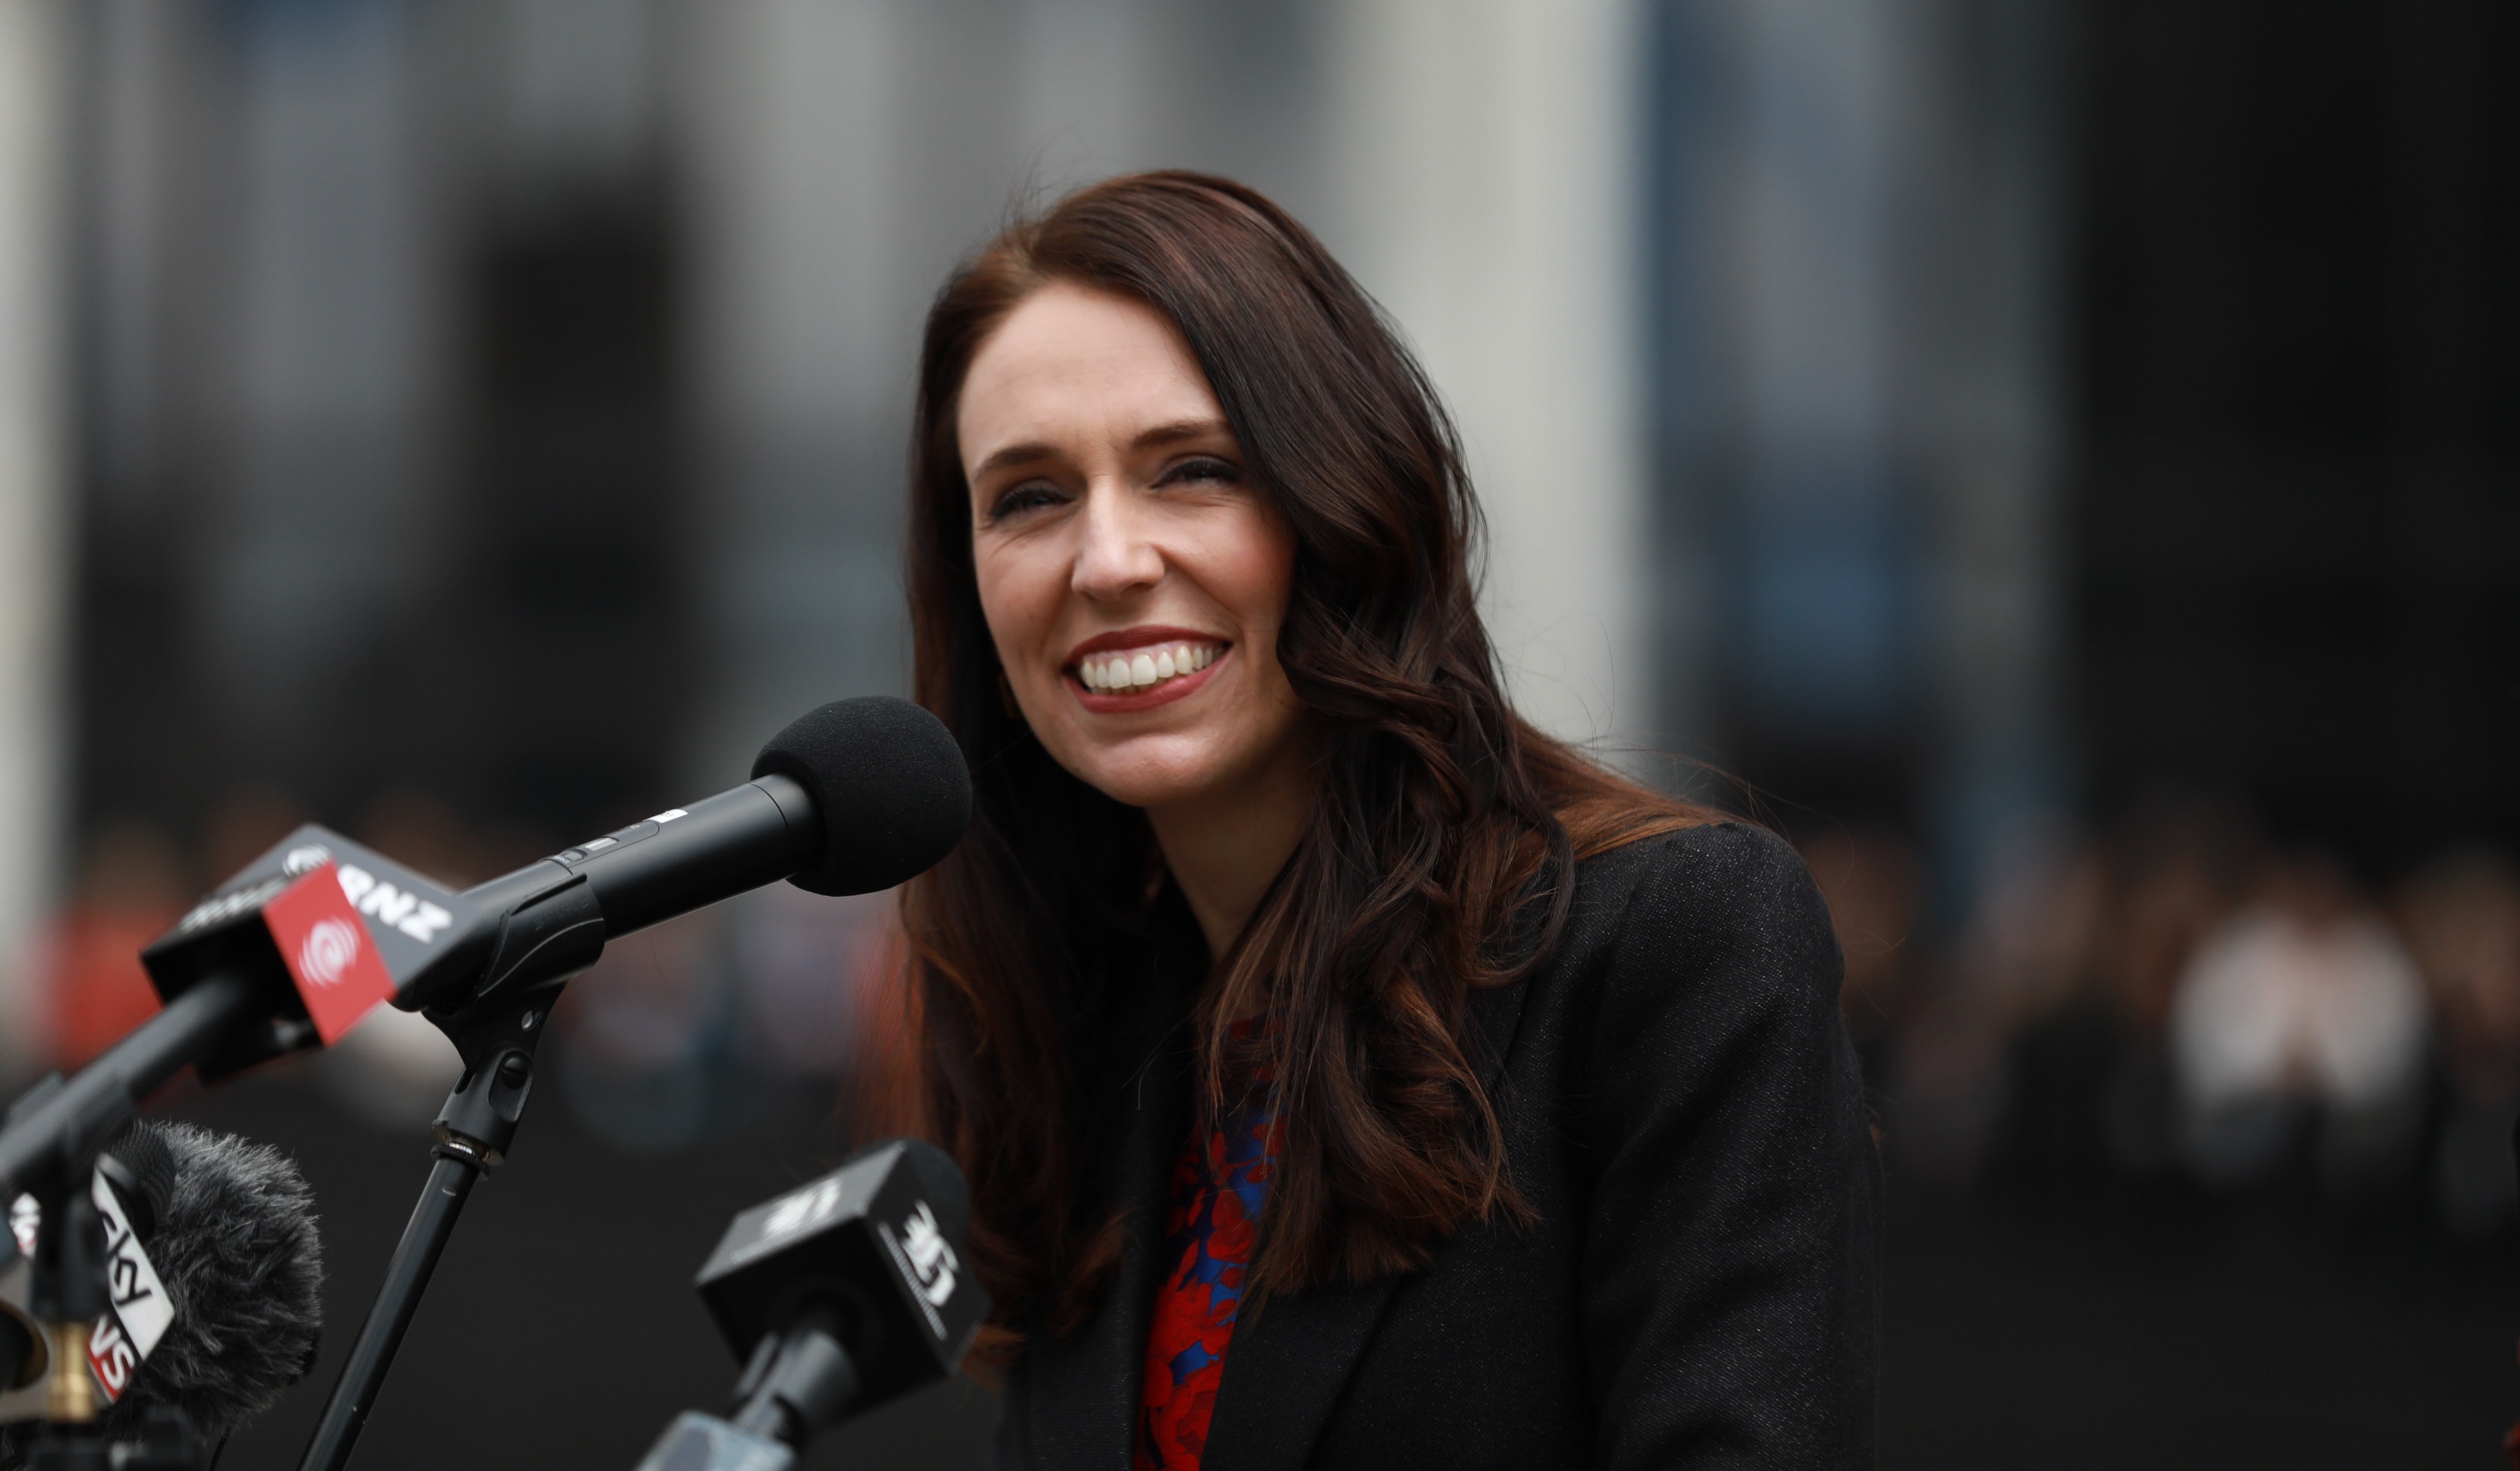 Jacinda Ardern breaks with tradition and addresses the public in her first move as Prime Minister.